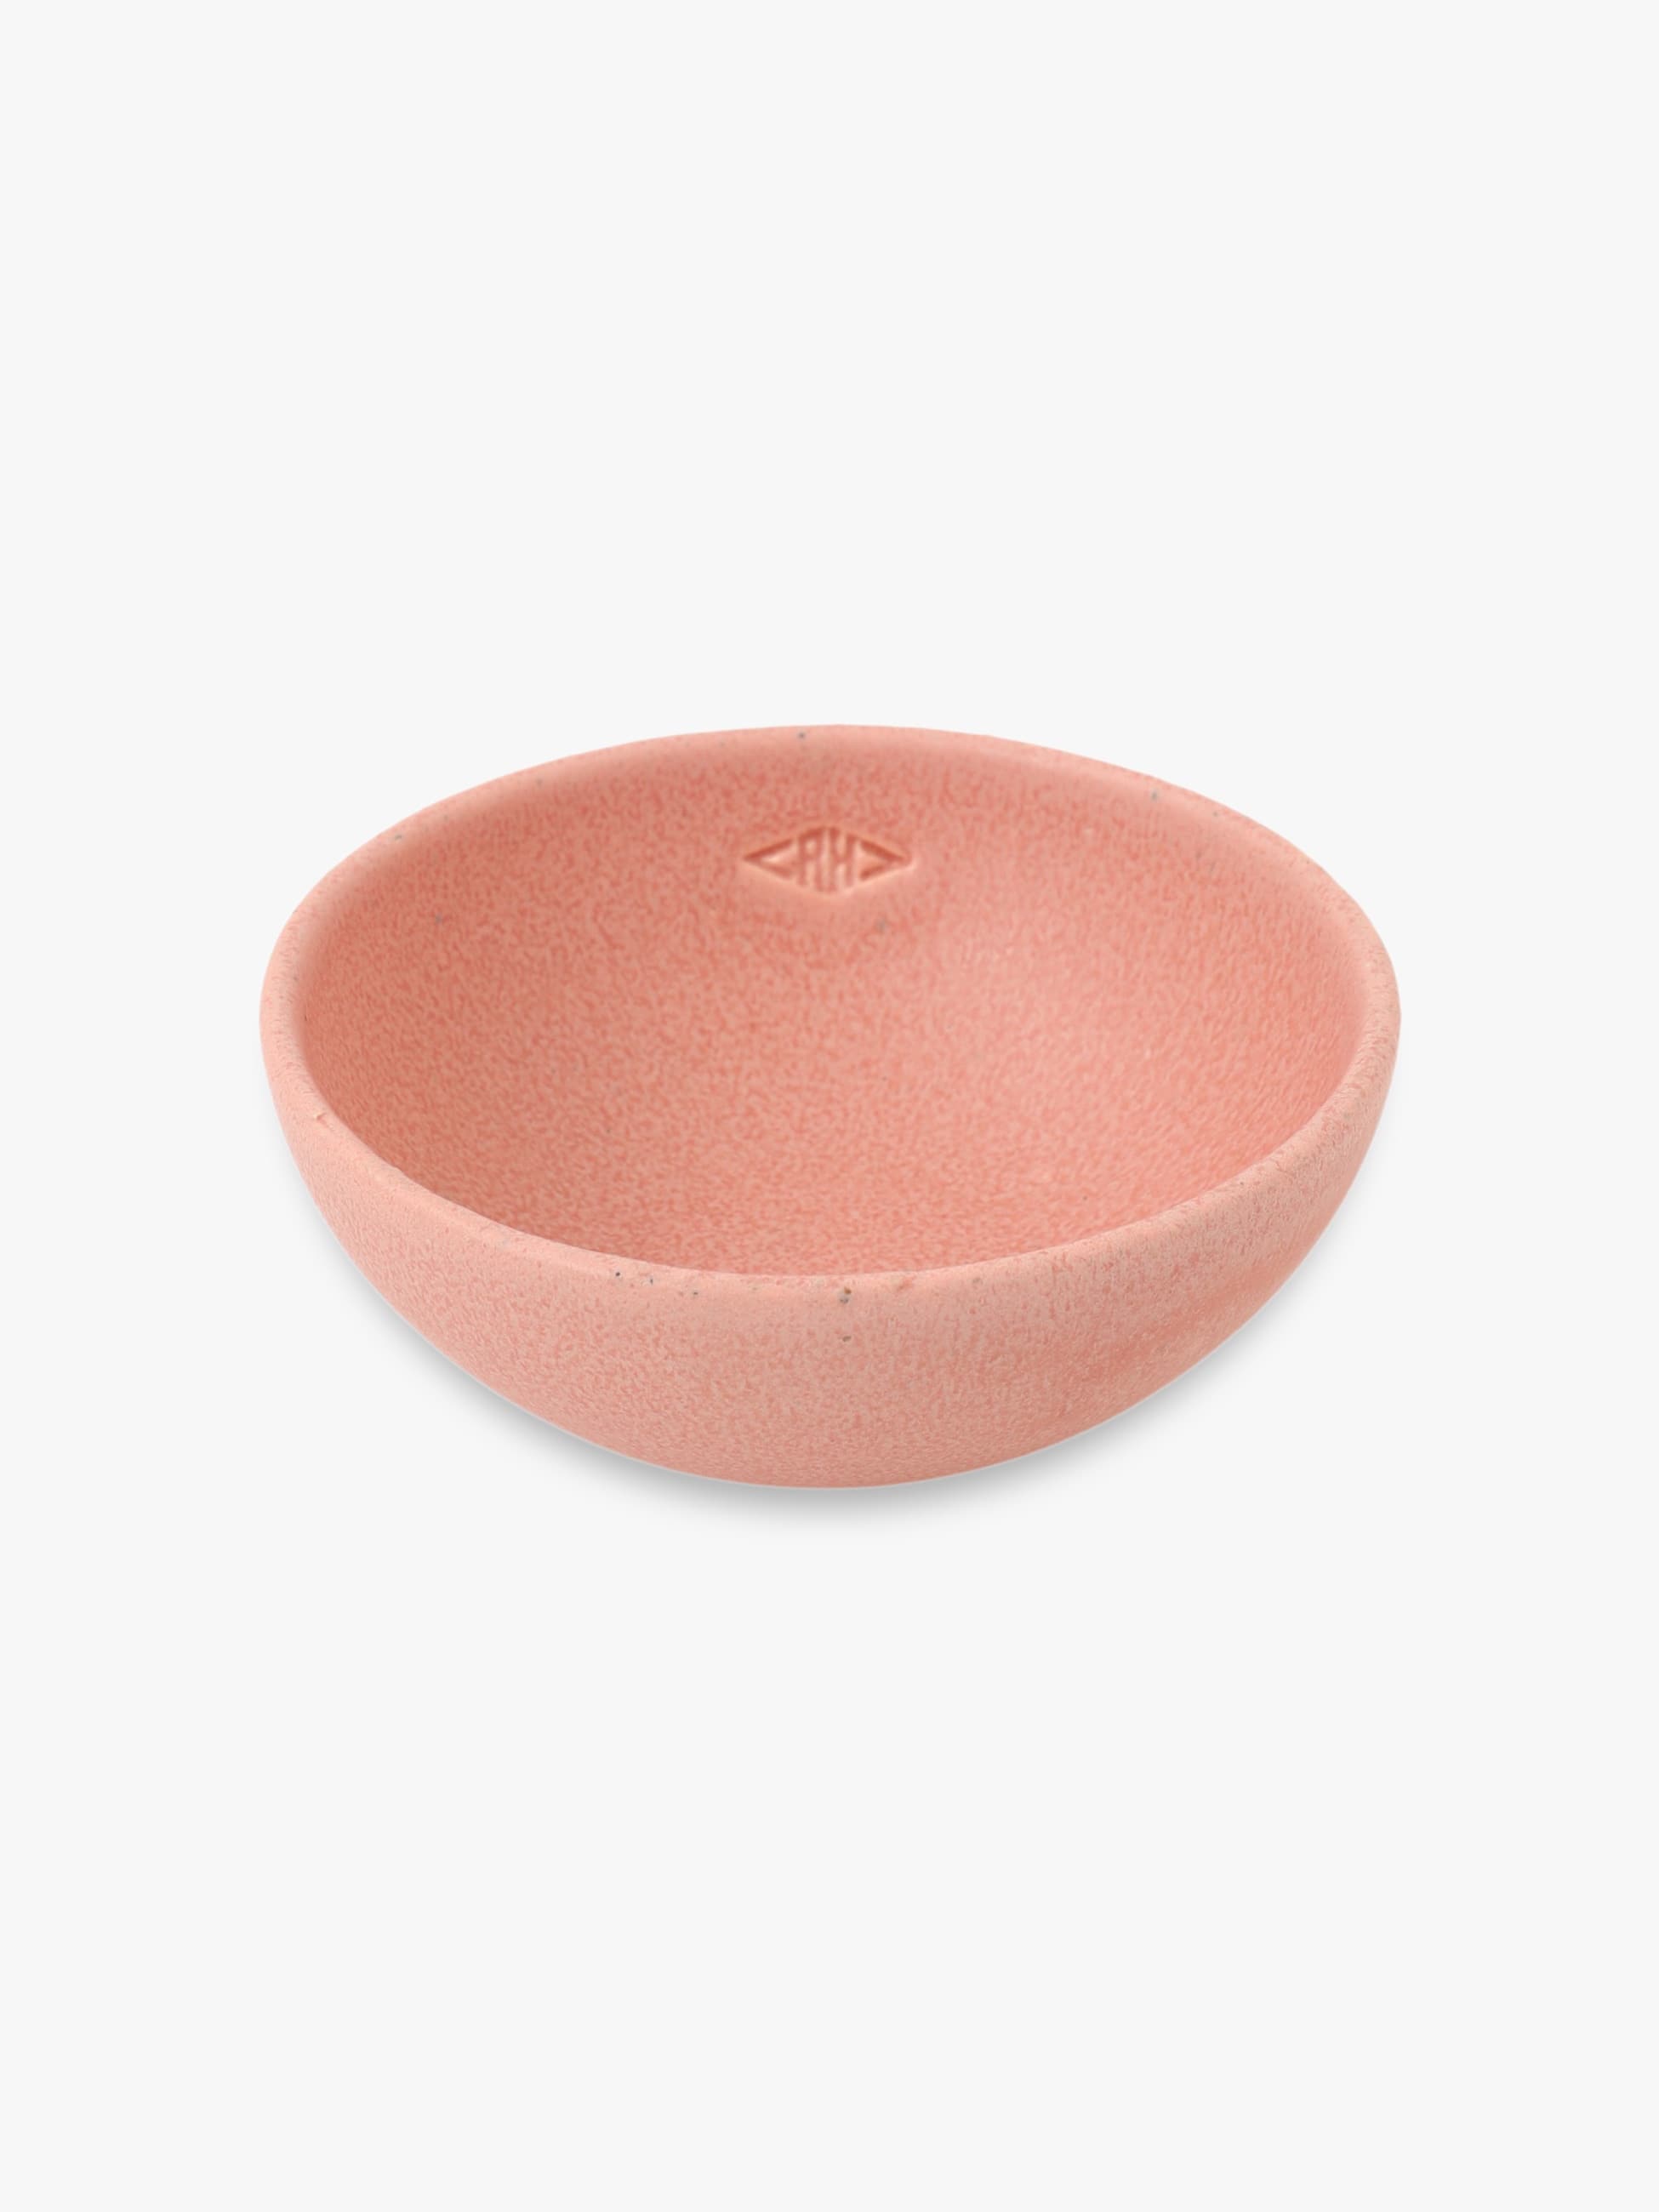 Recycled Clay Dessert Bowl 詳細画像 pink 1